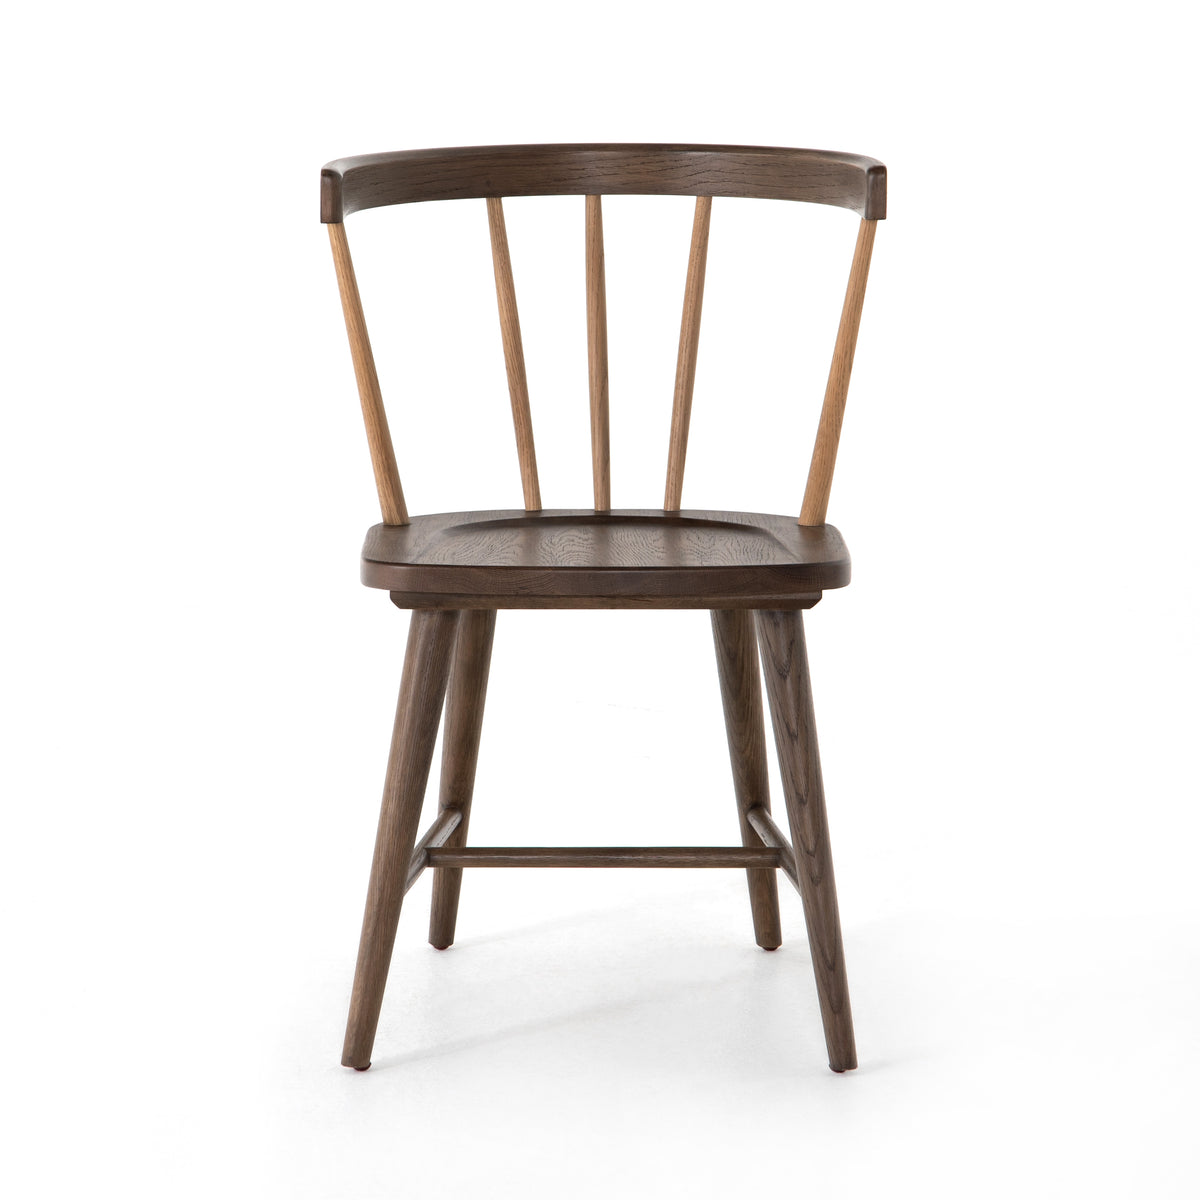 NAPLES DINING CHAIR